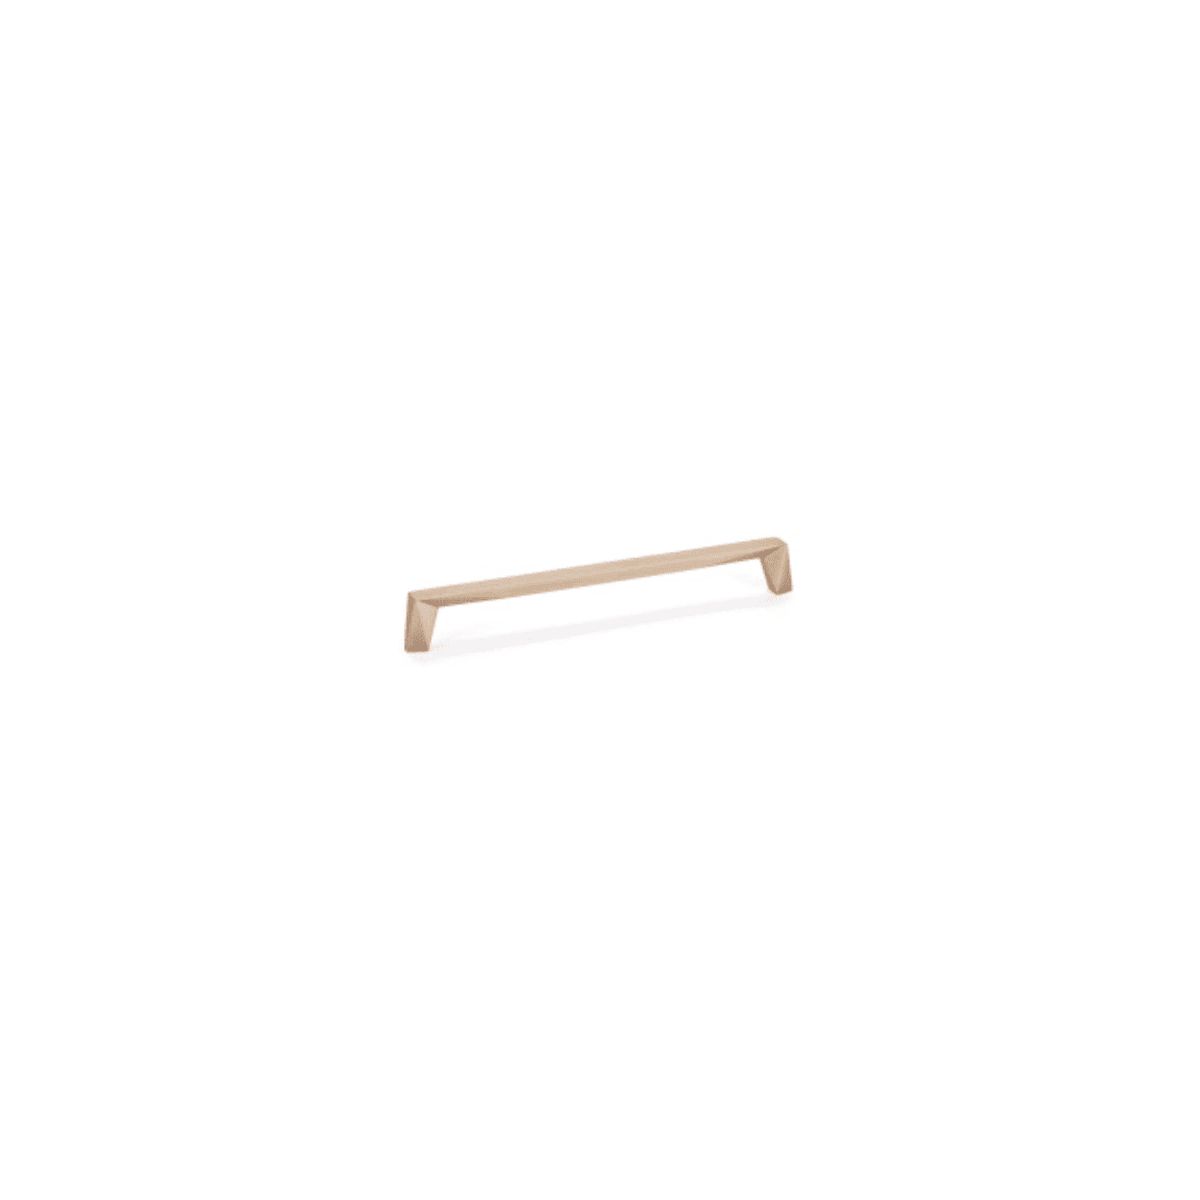 Berenson 2366-1MDB-P Swagger 8-3/4 Inch Center to Center Handle Cabinet Pull | Build.com, Inc.